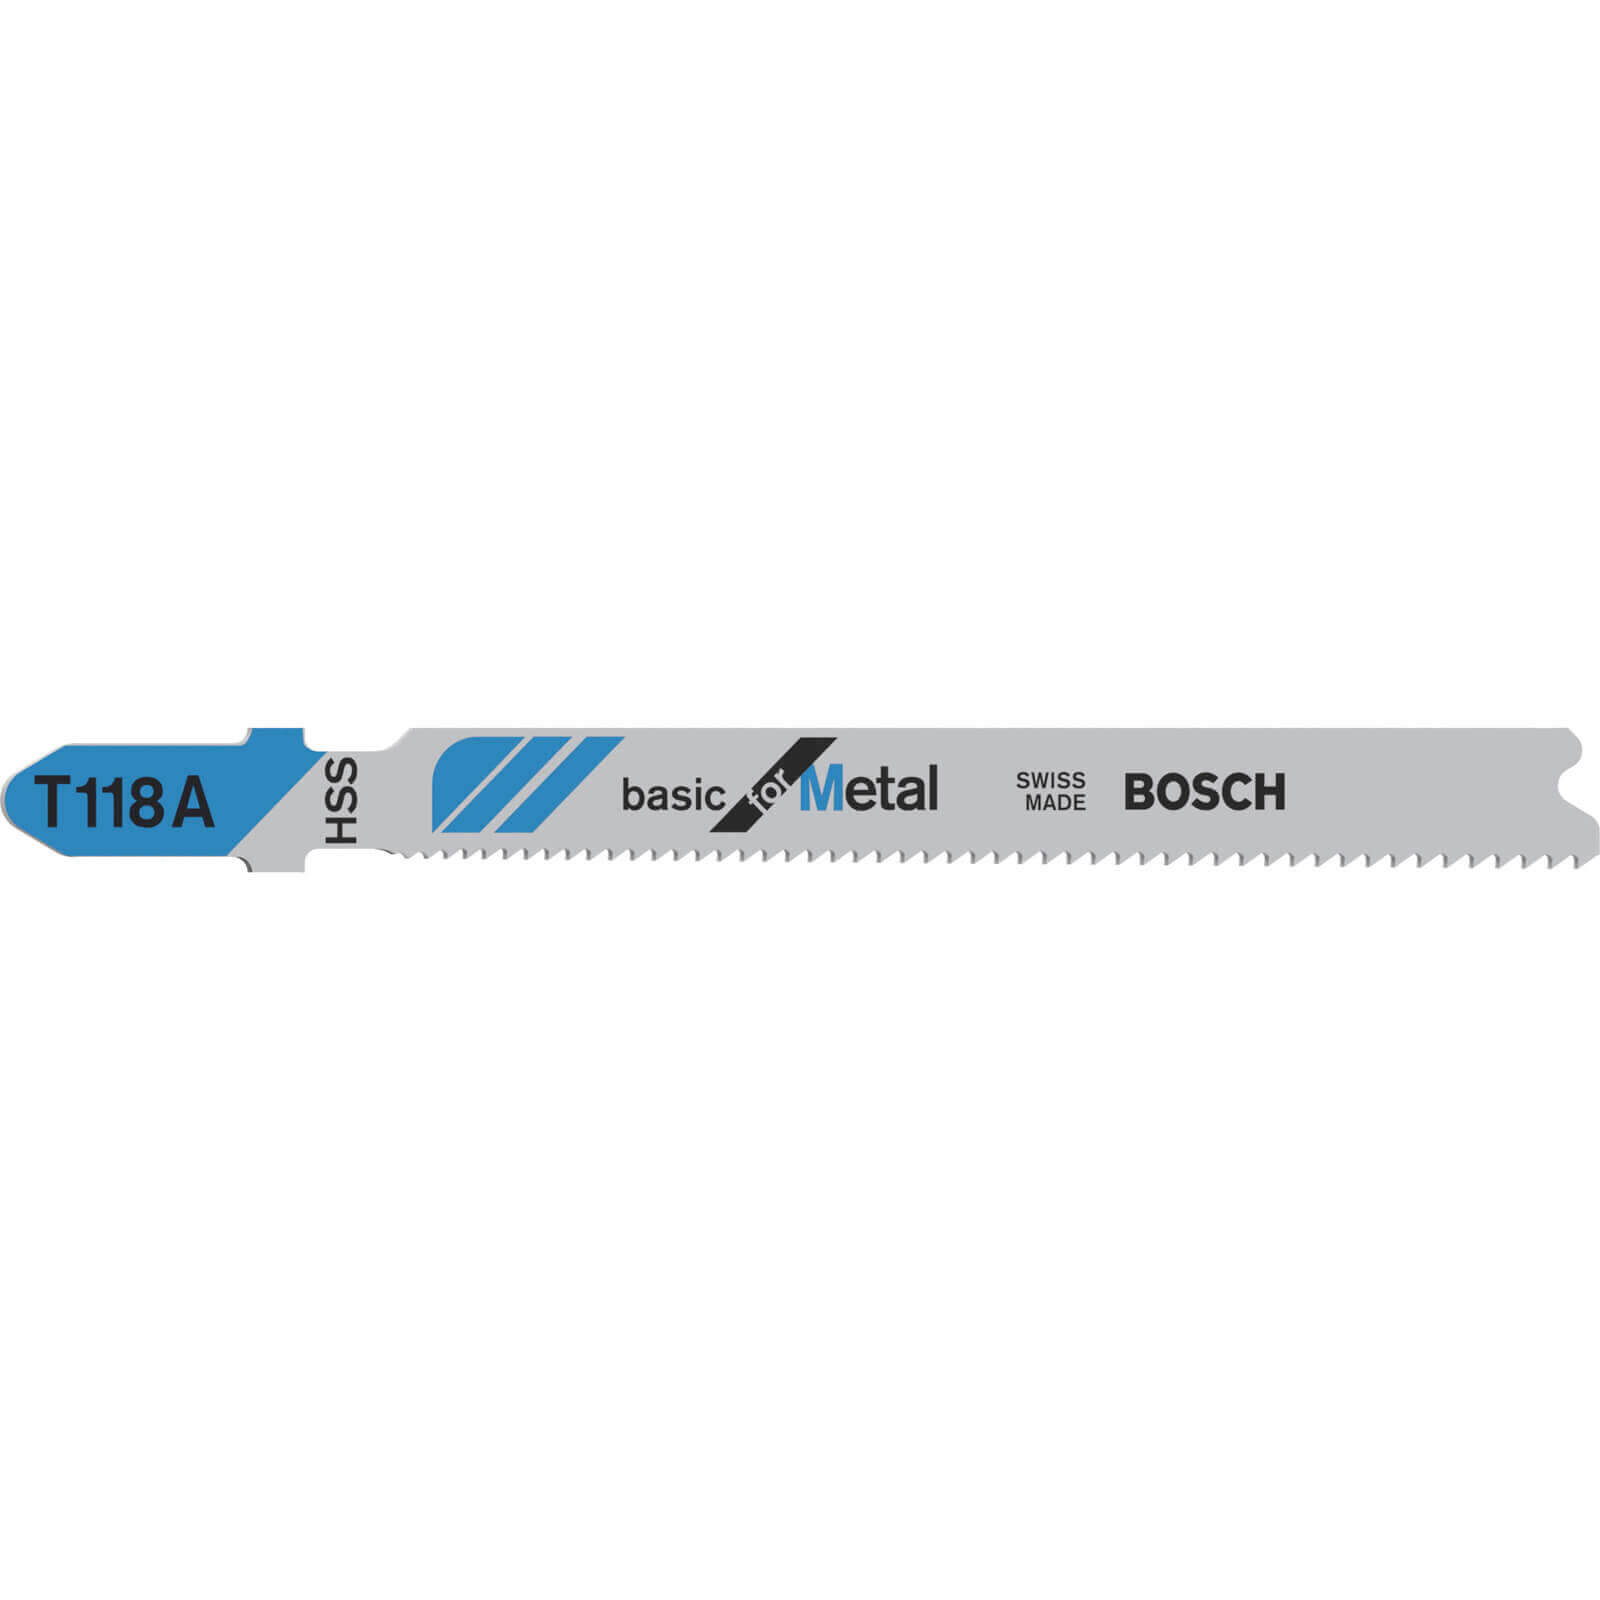 Image of Bosch T118 A Metal Cutting Jigsaw Blades Pack of 3